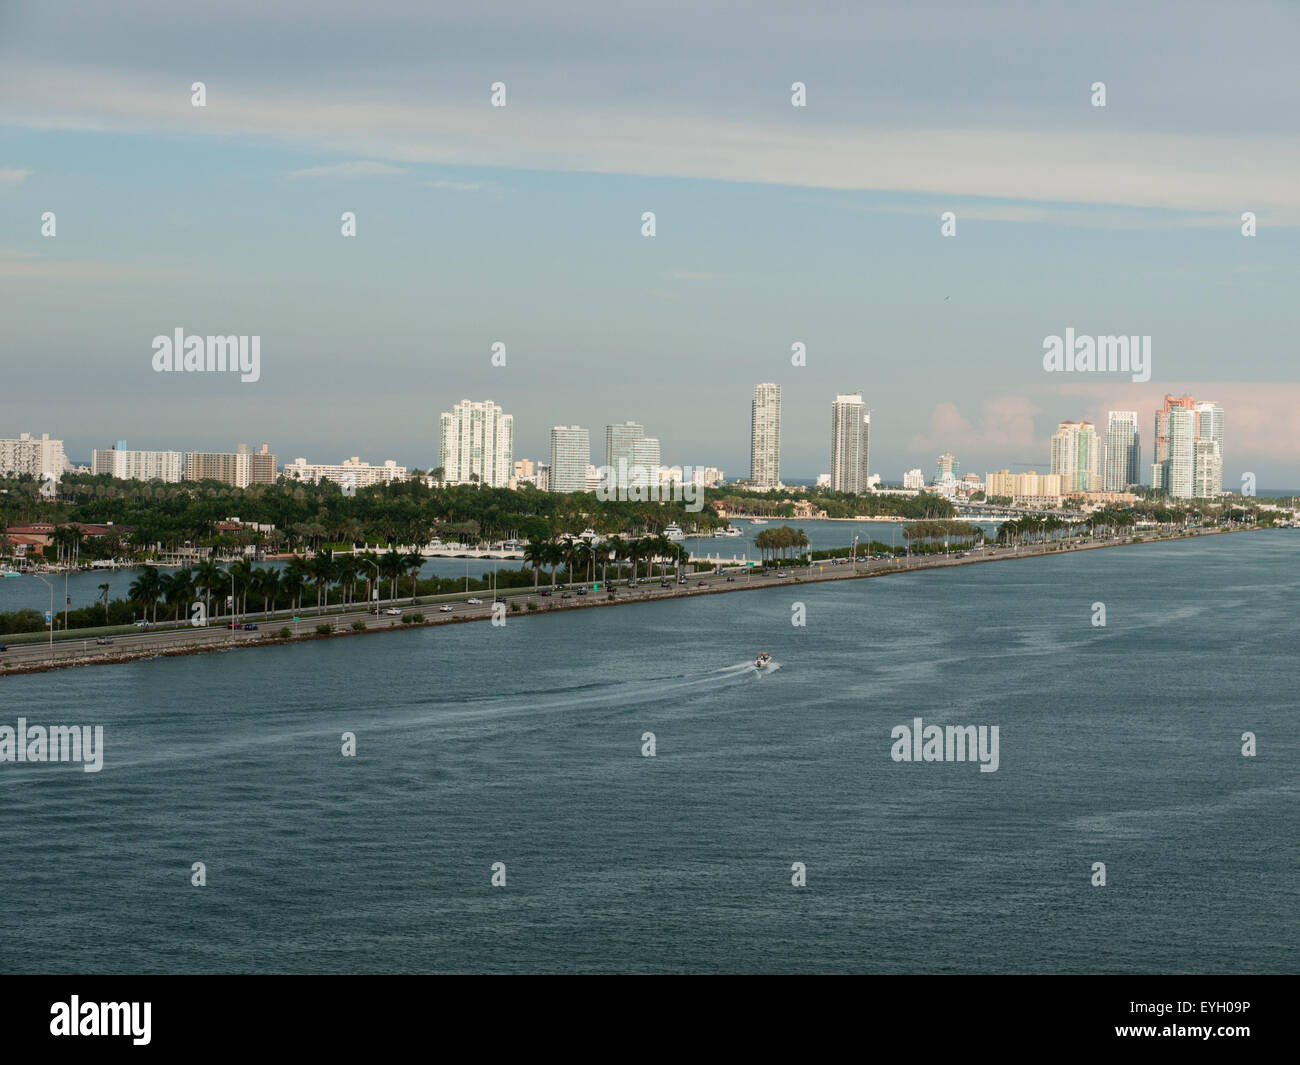 Late afternoon along Biscayne Bay, Florida Stock Photo